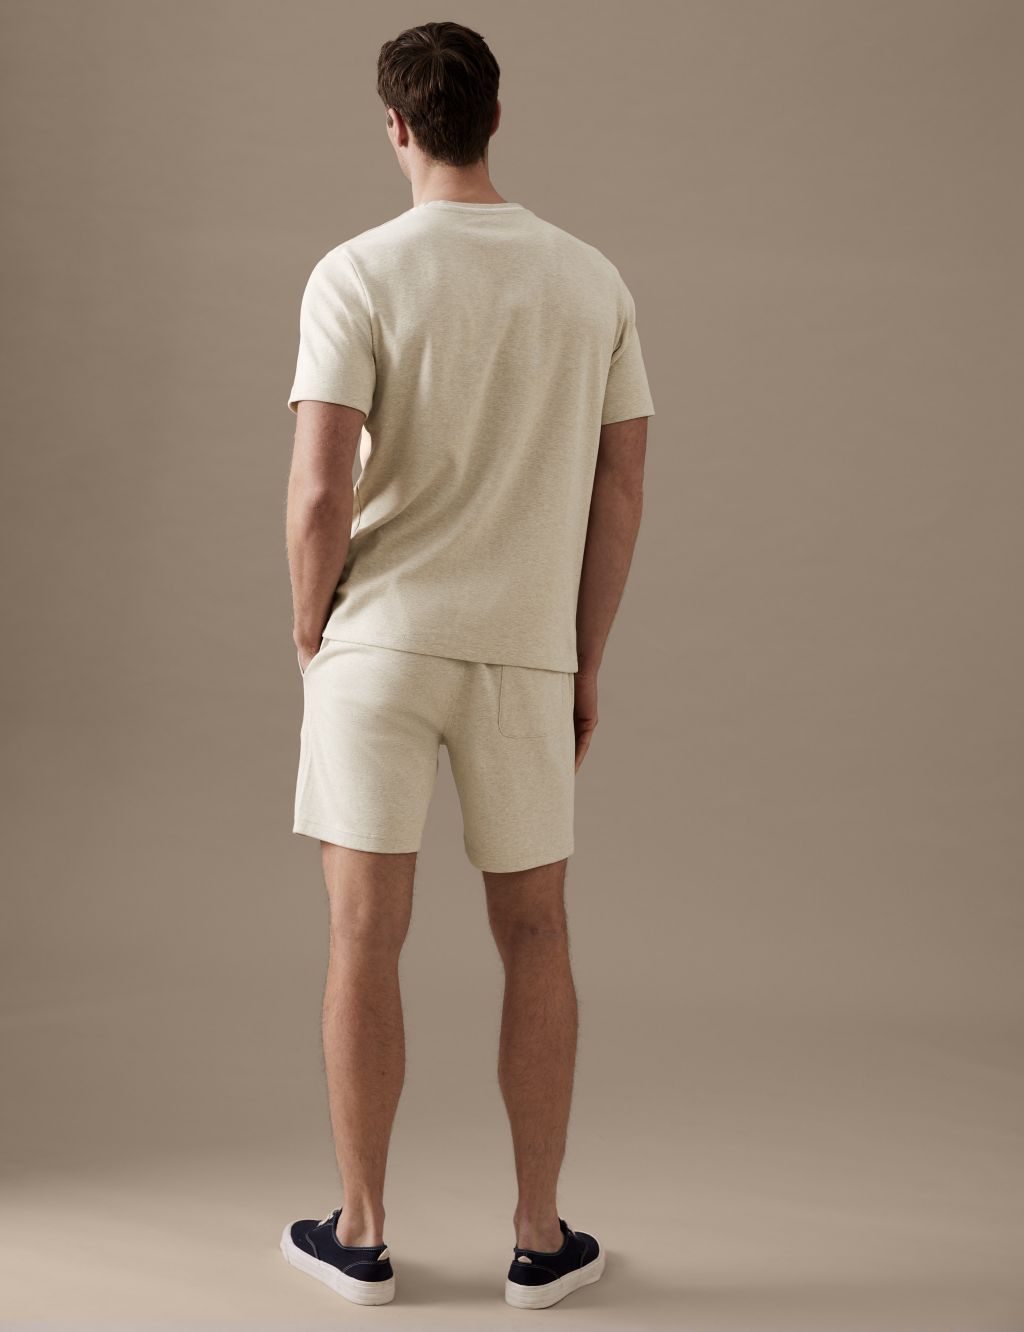 Textured Pure Cotton Jersey Shorts image 4